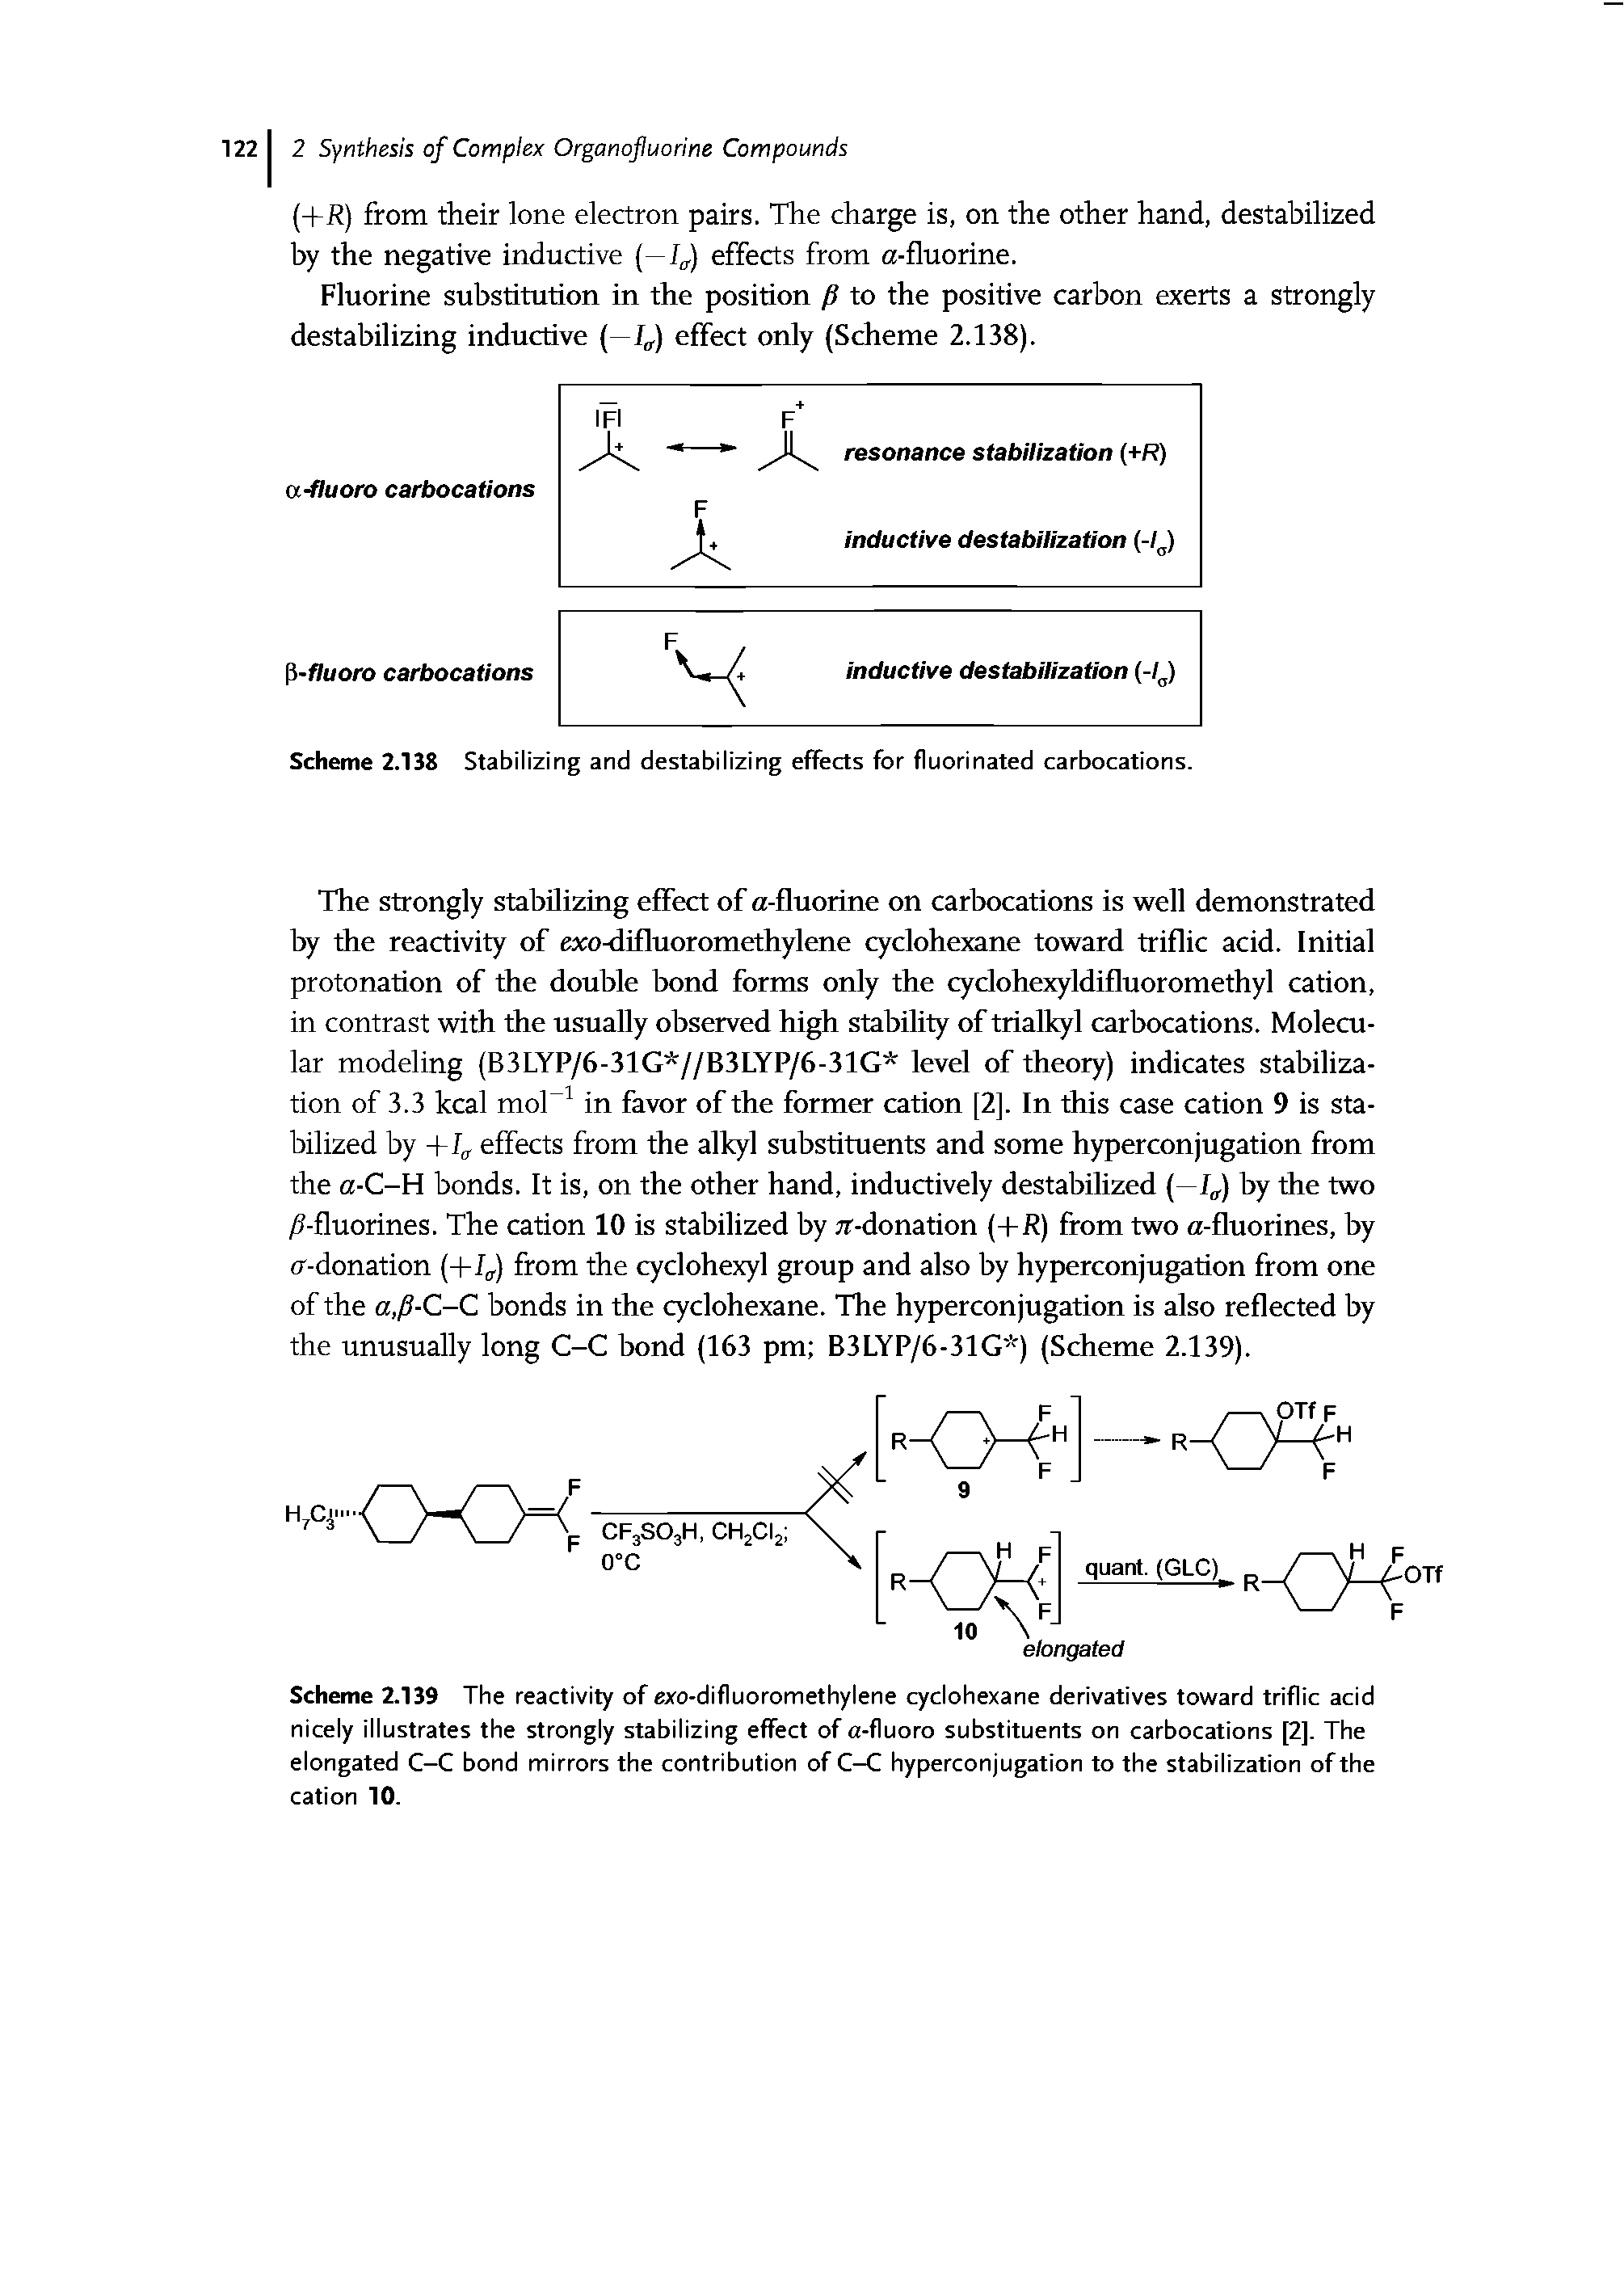 Scheme 2.138 Stabilizing and destabilizing effects for fluorinated carbocations.